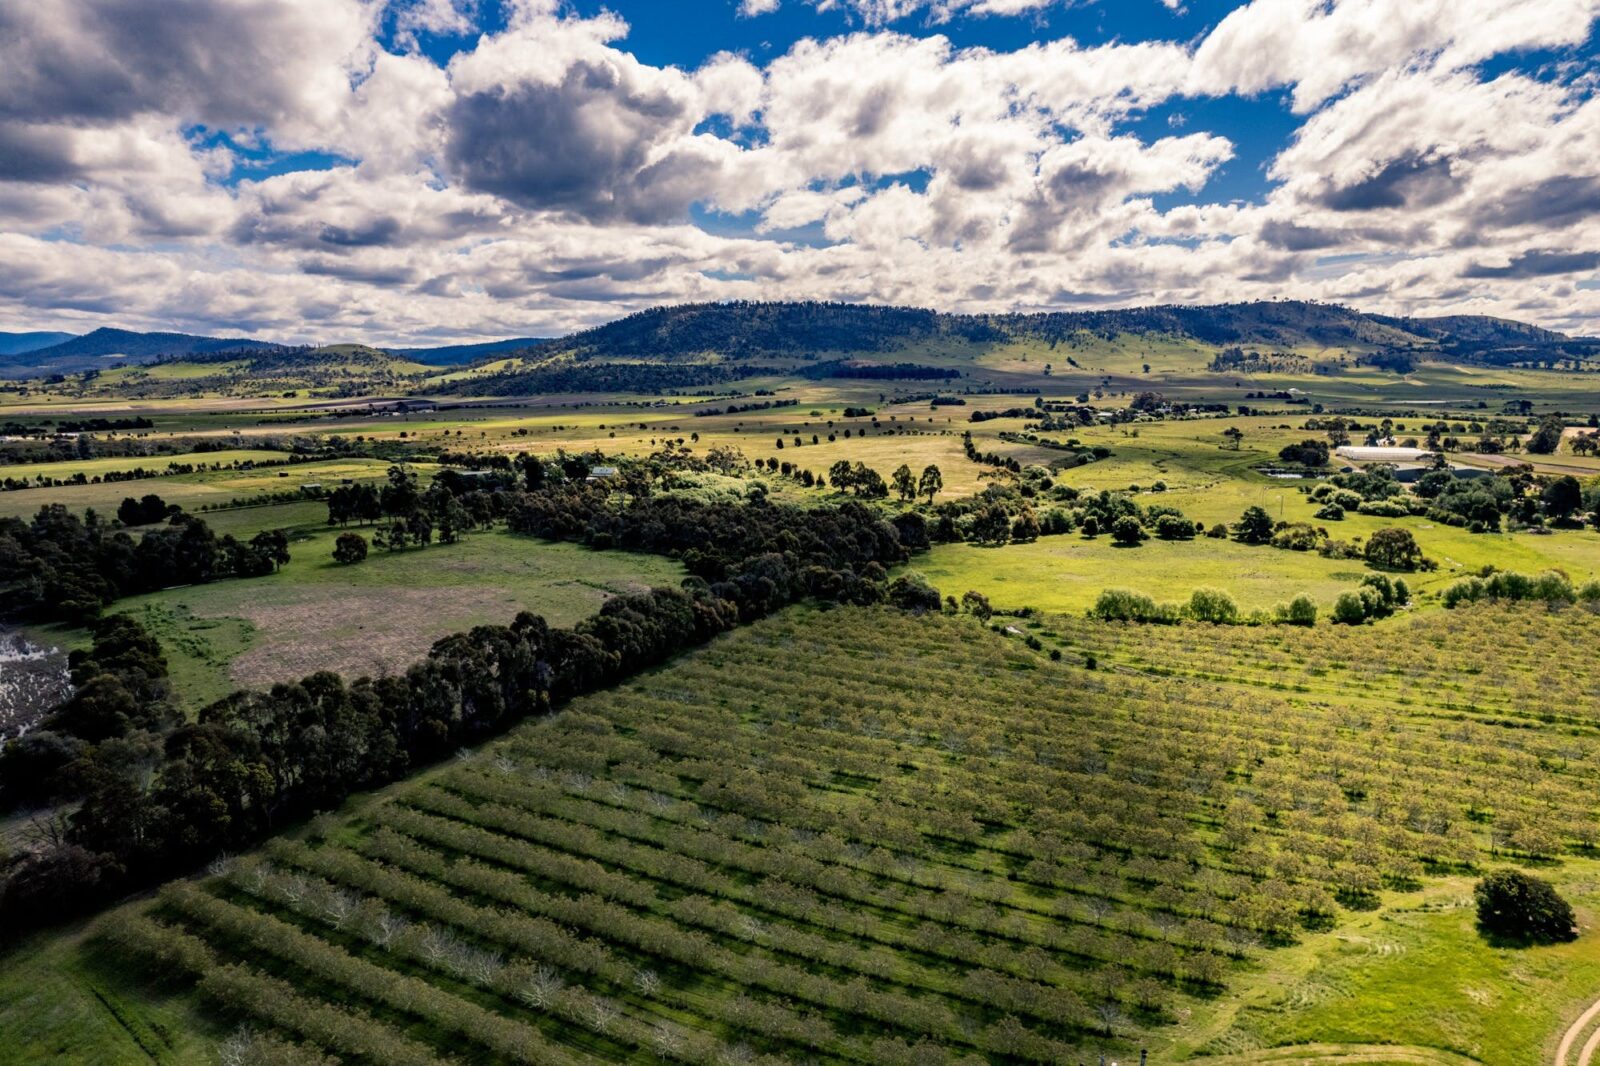 An aerial photo showing rows of walnuts trees and beyond to a very green valley into the distance.